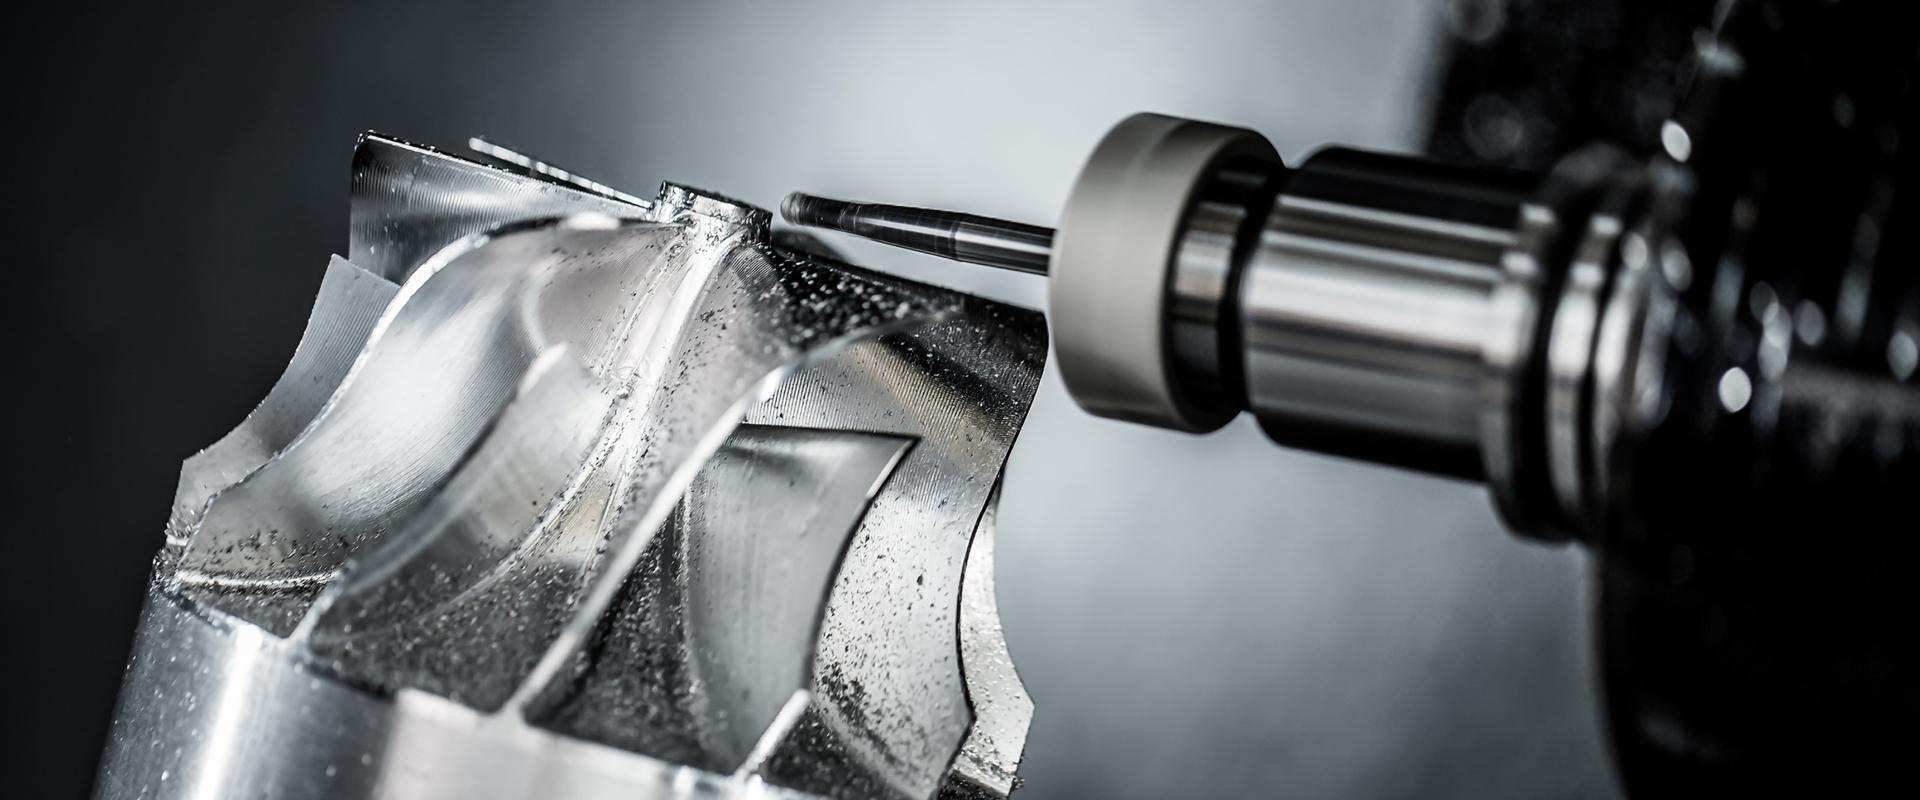 4 Goals to Achieve a Precision Milling Center of Excellence